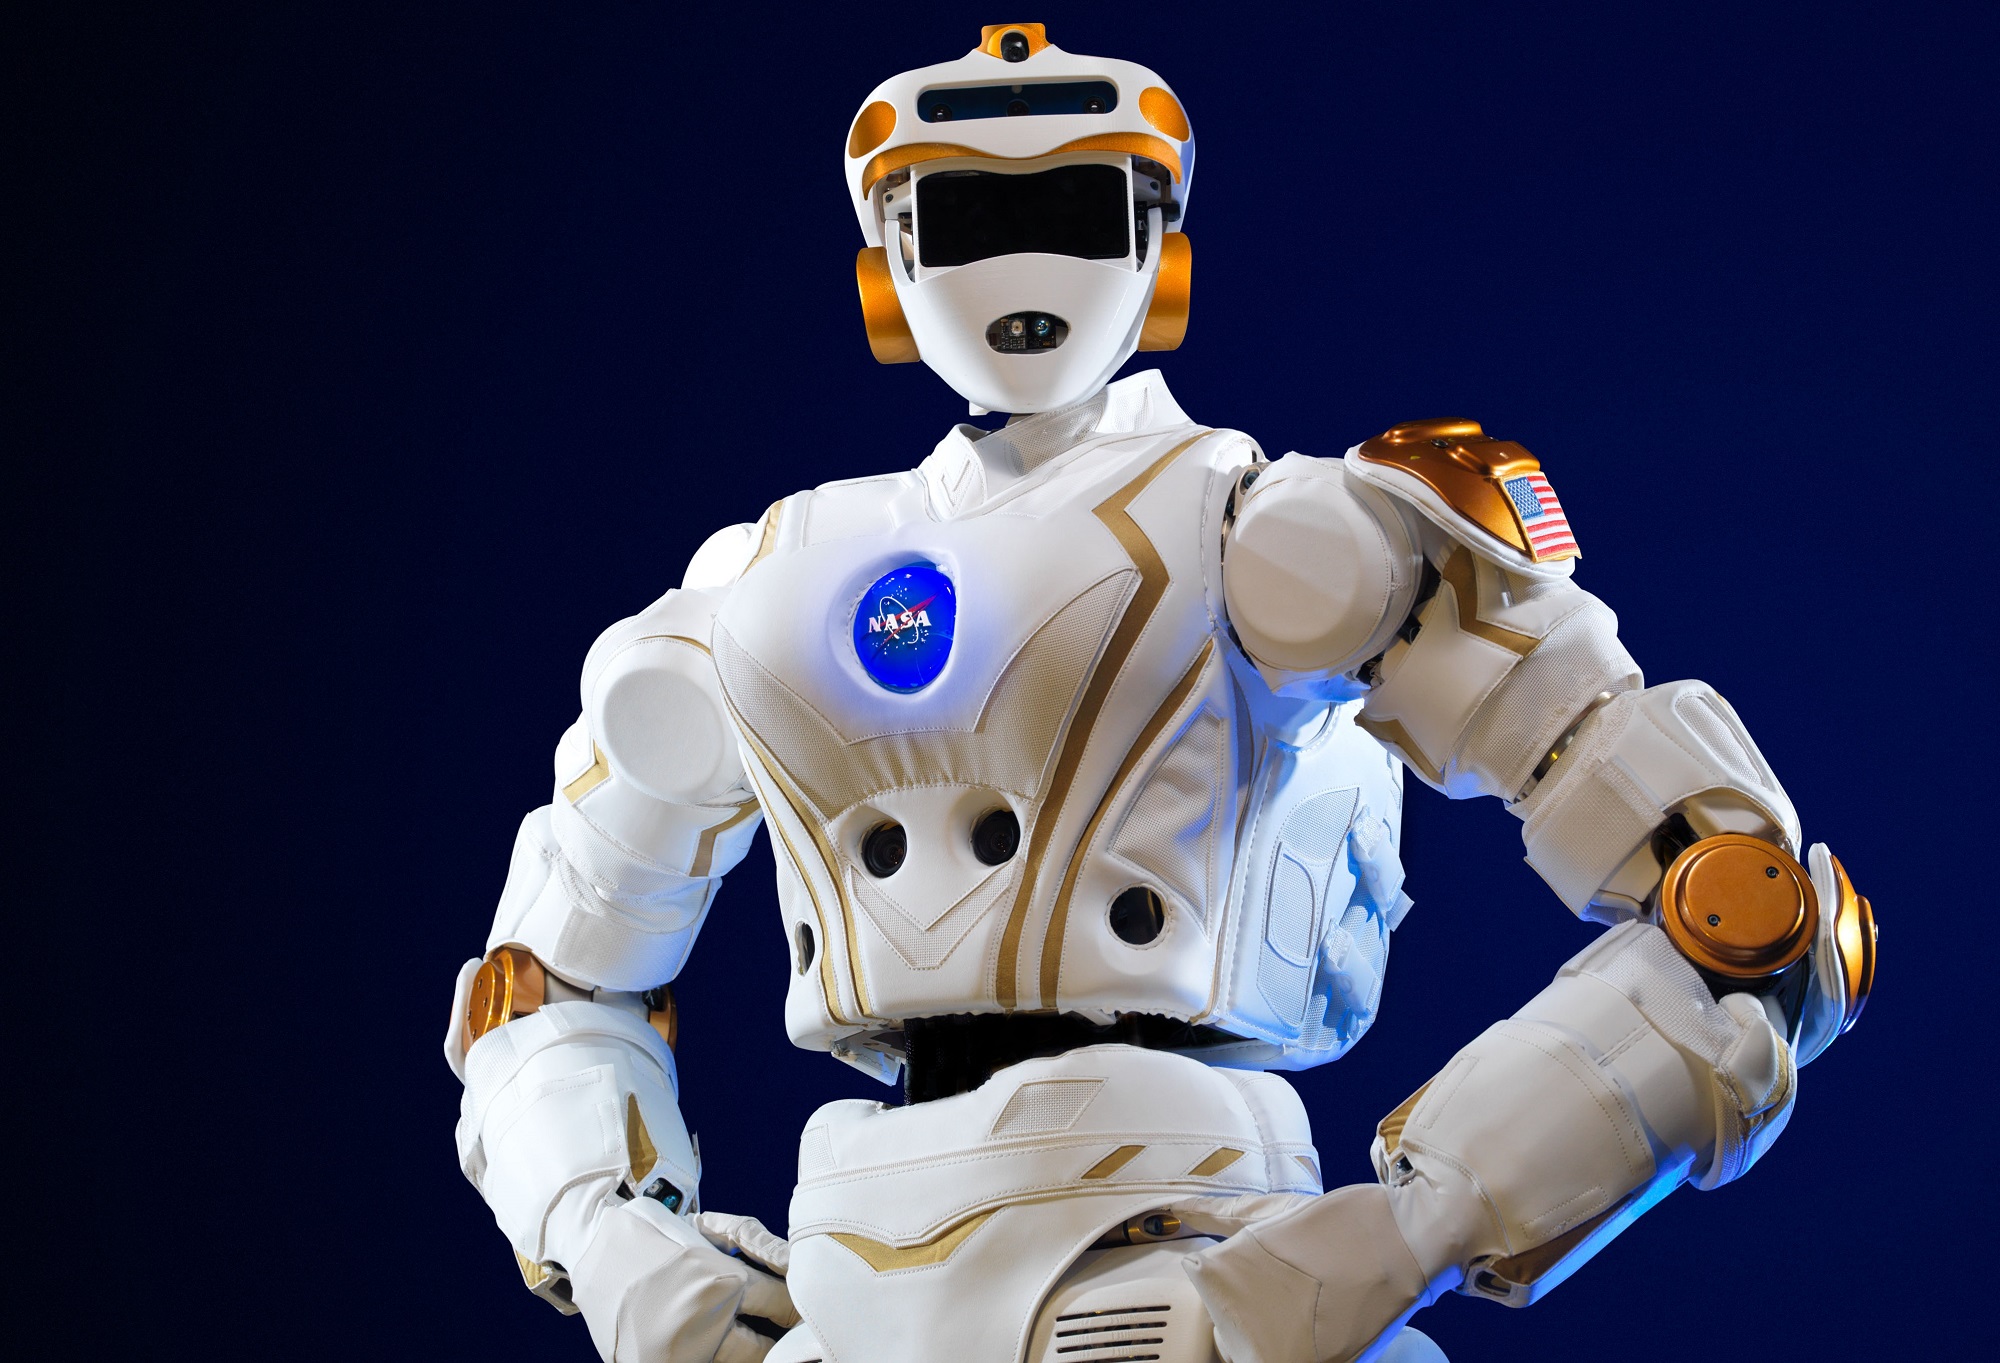 MIT Claims they are Programming Humanoid Robots to help Explore Mars